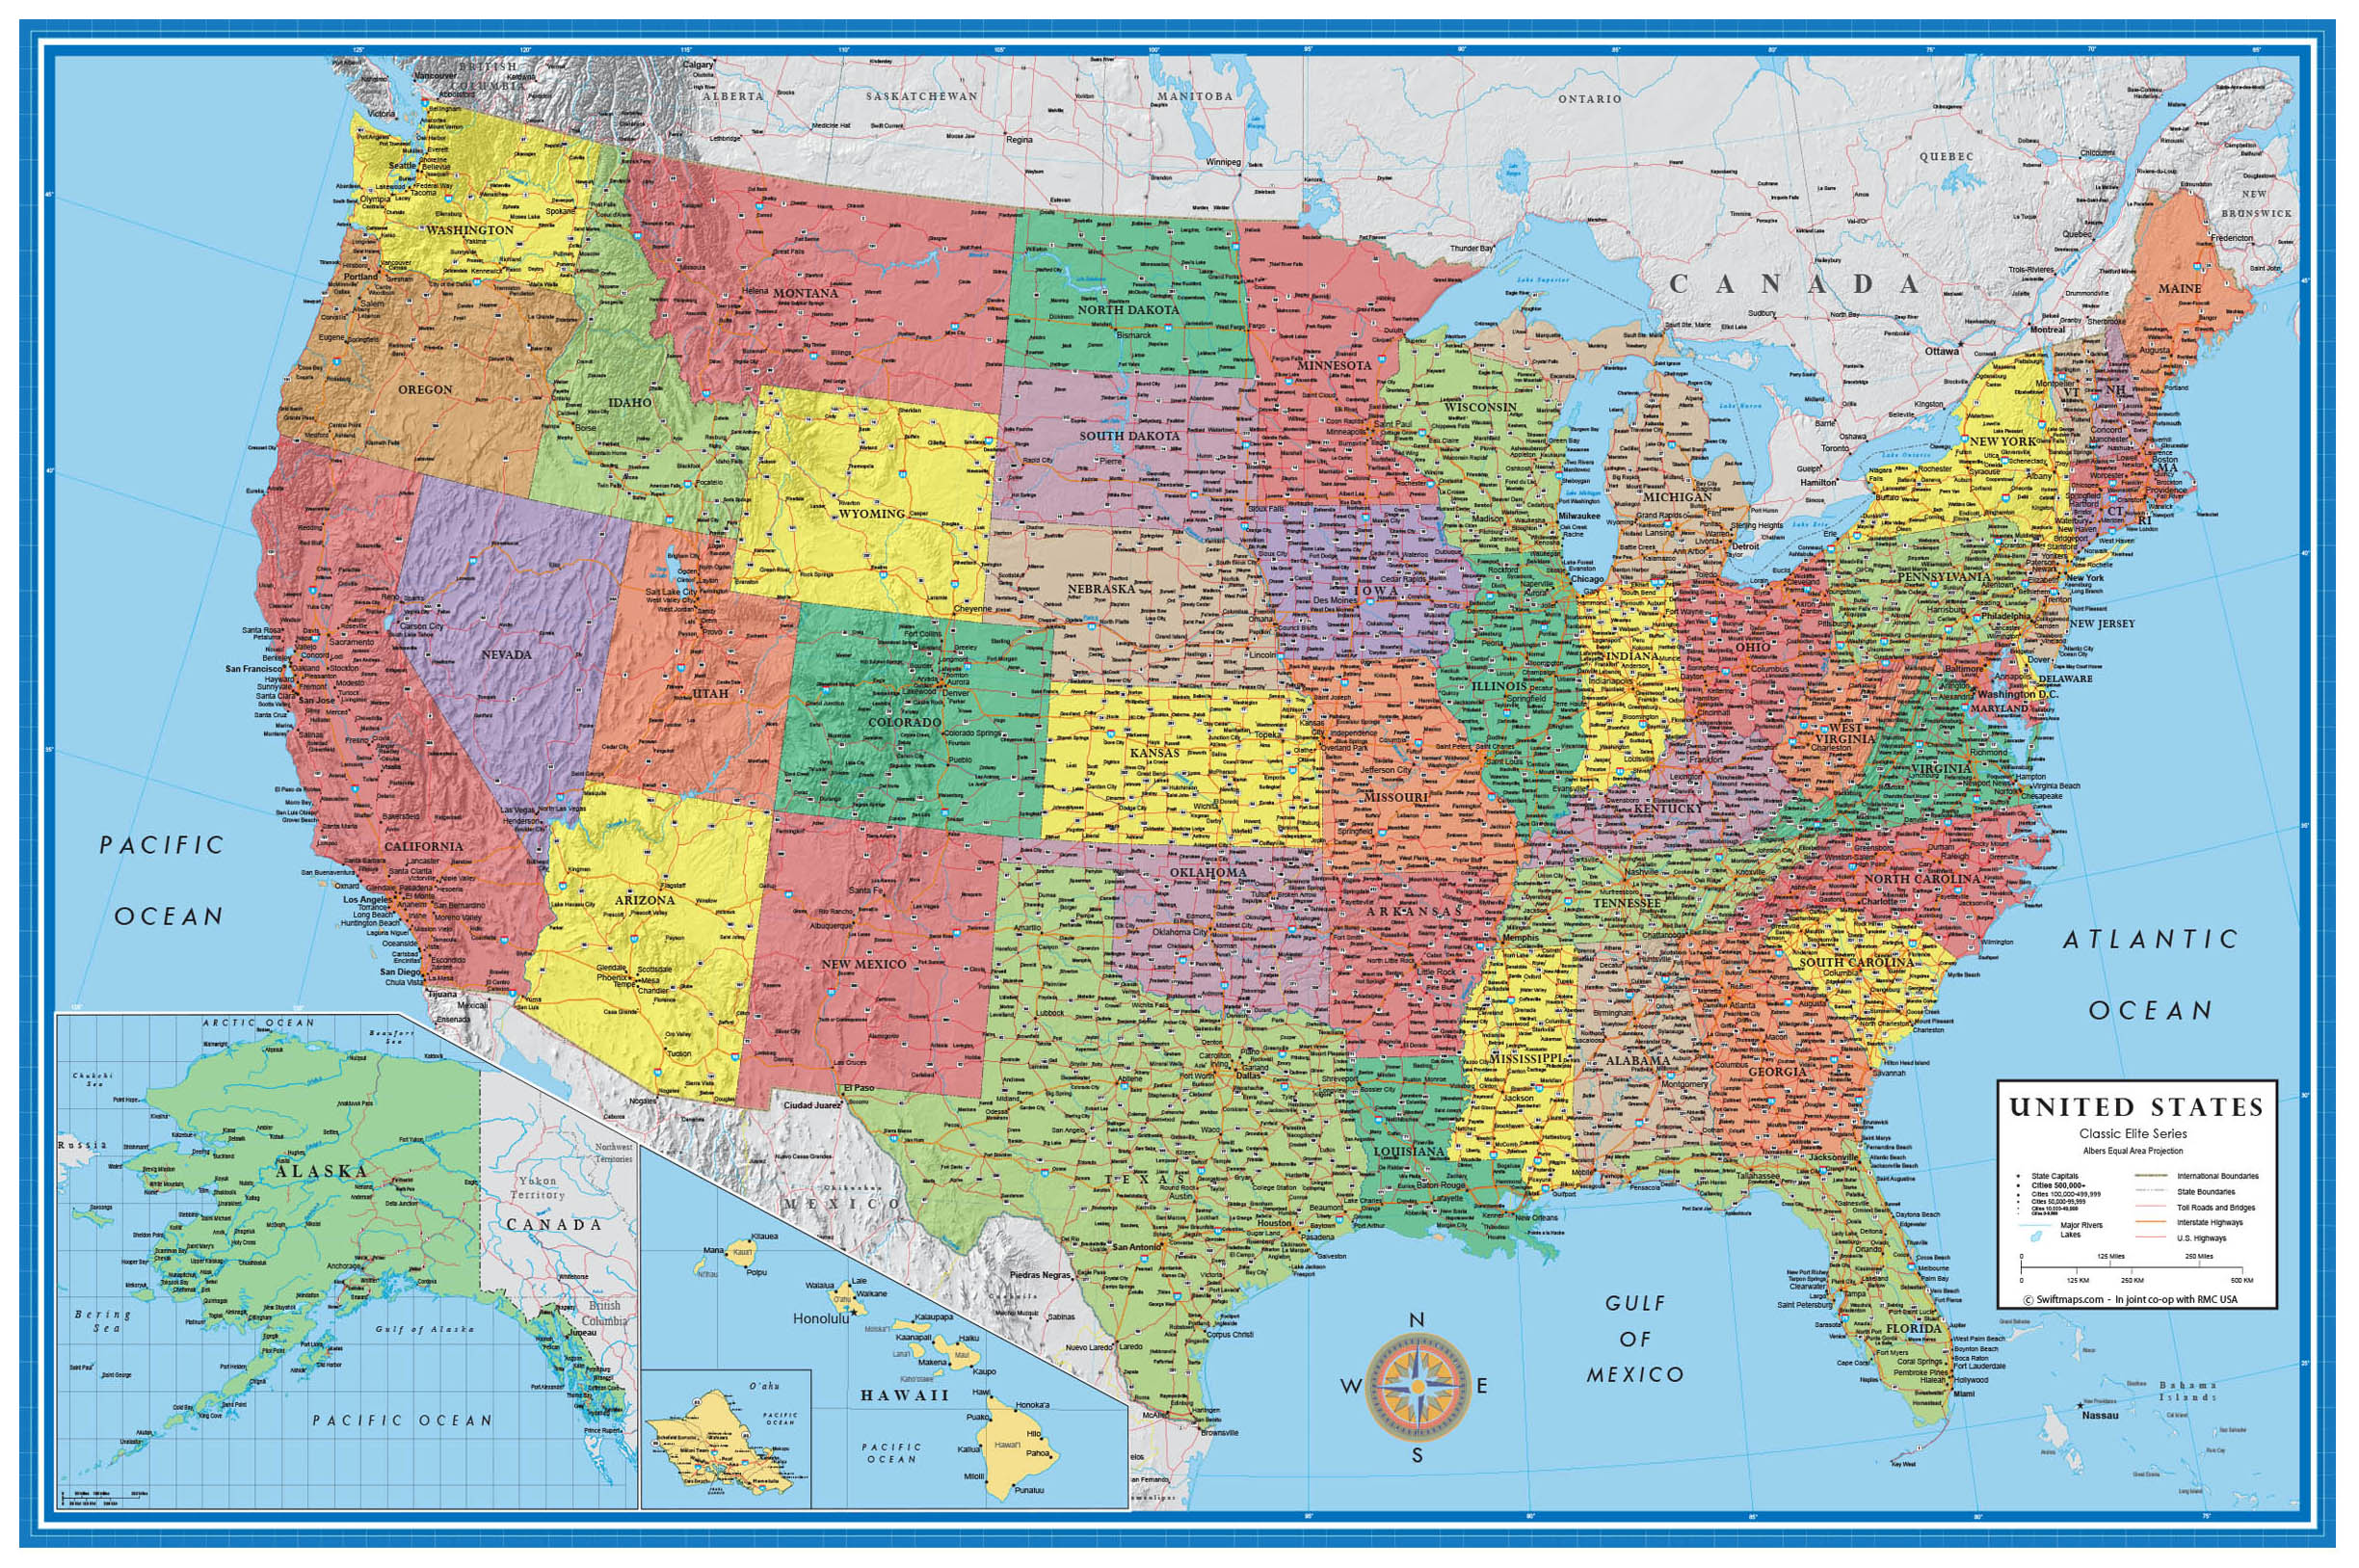 24x36 United States, USA, US Premier Wall Map Paper Folded - image 1 of 4